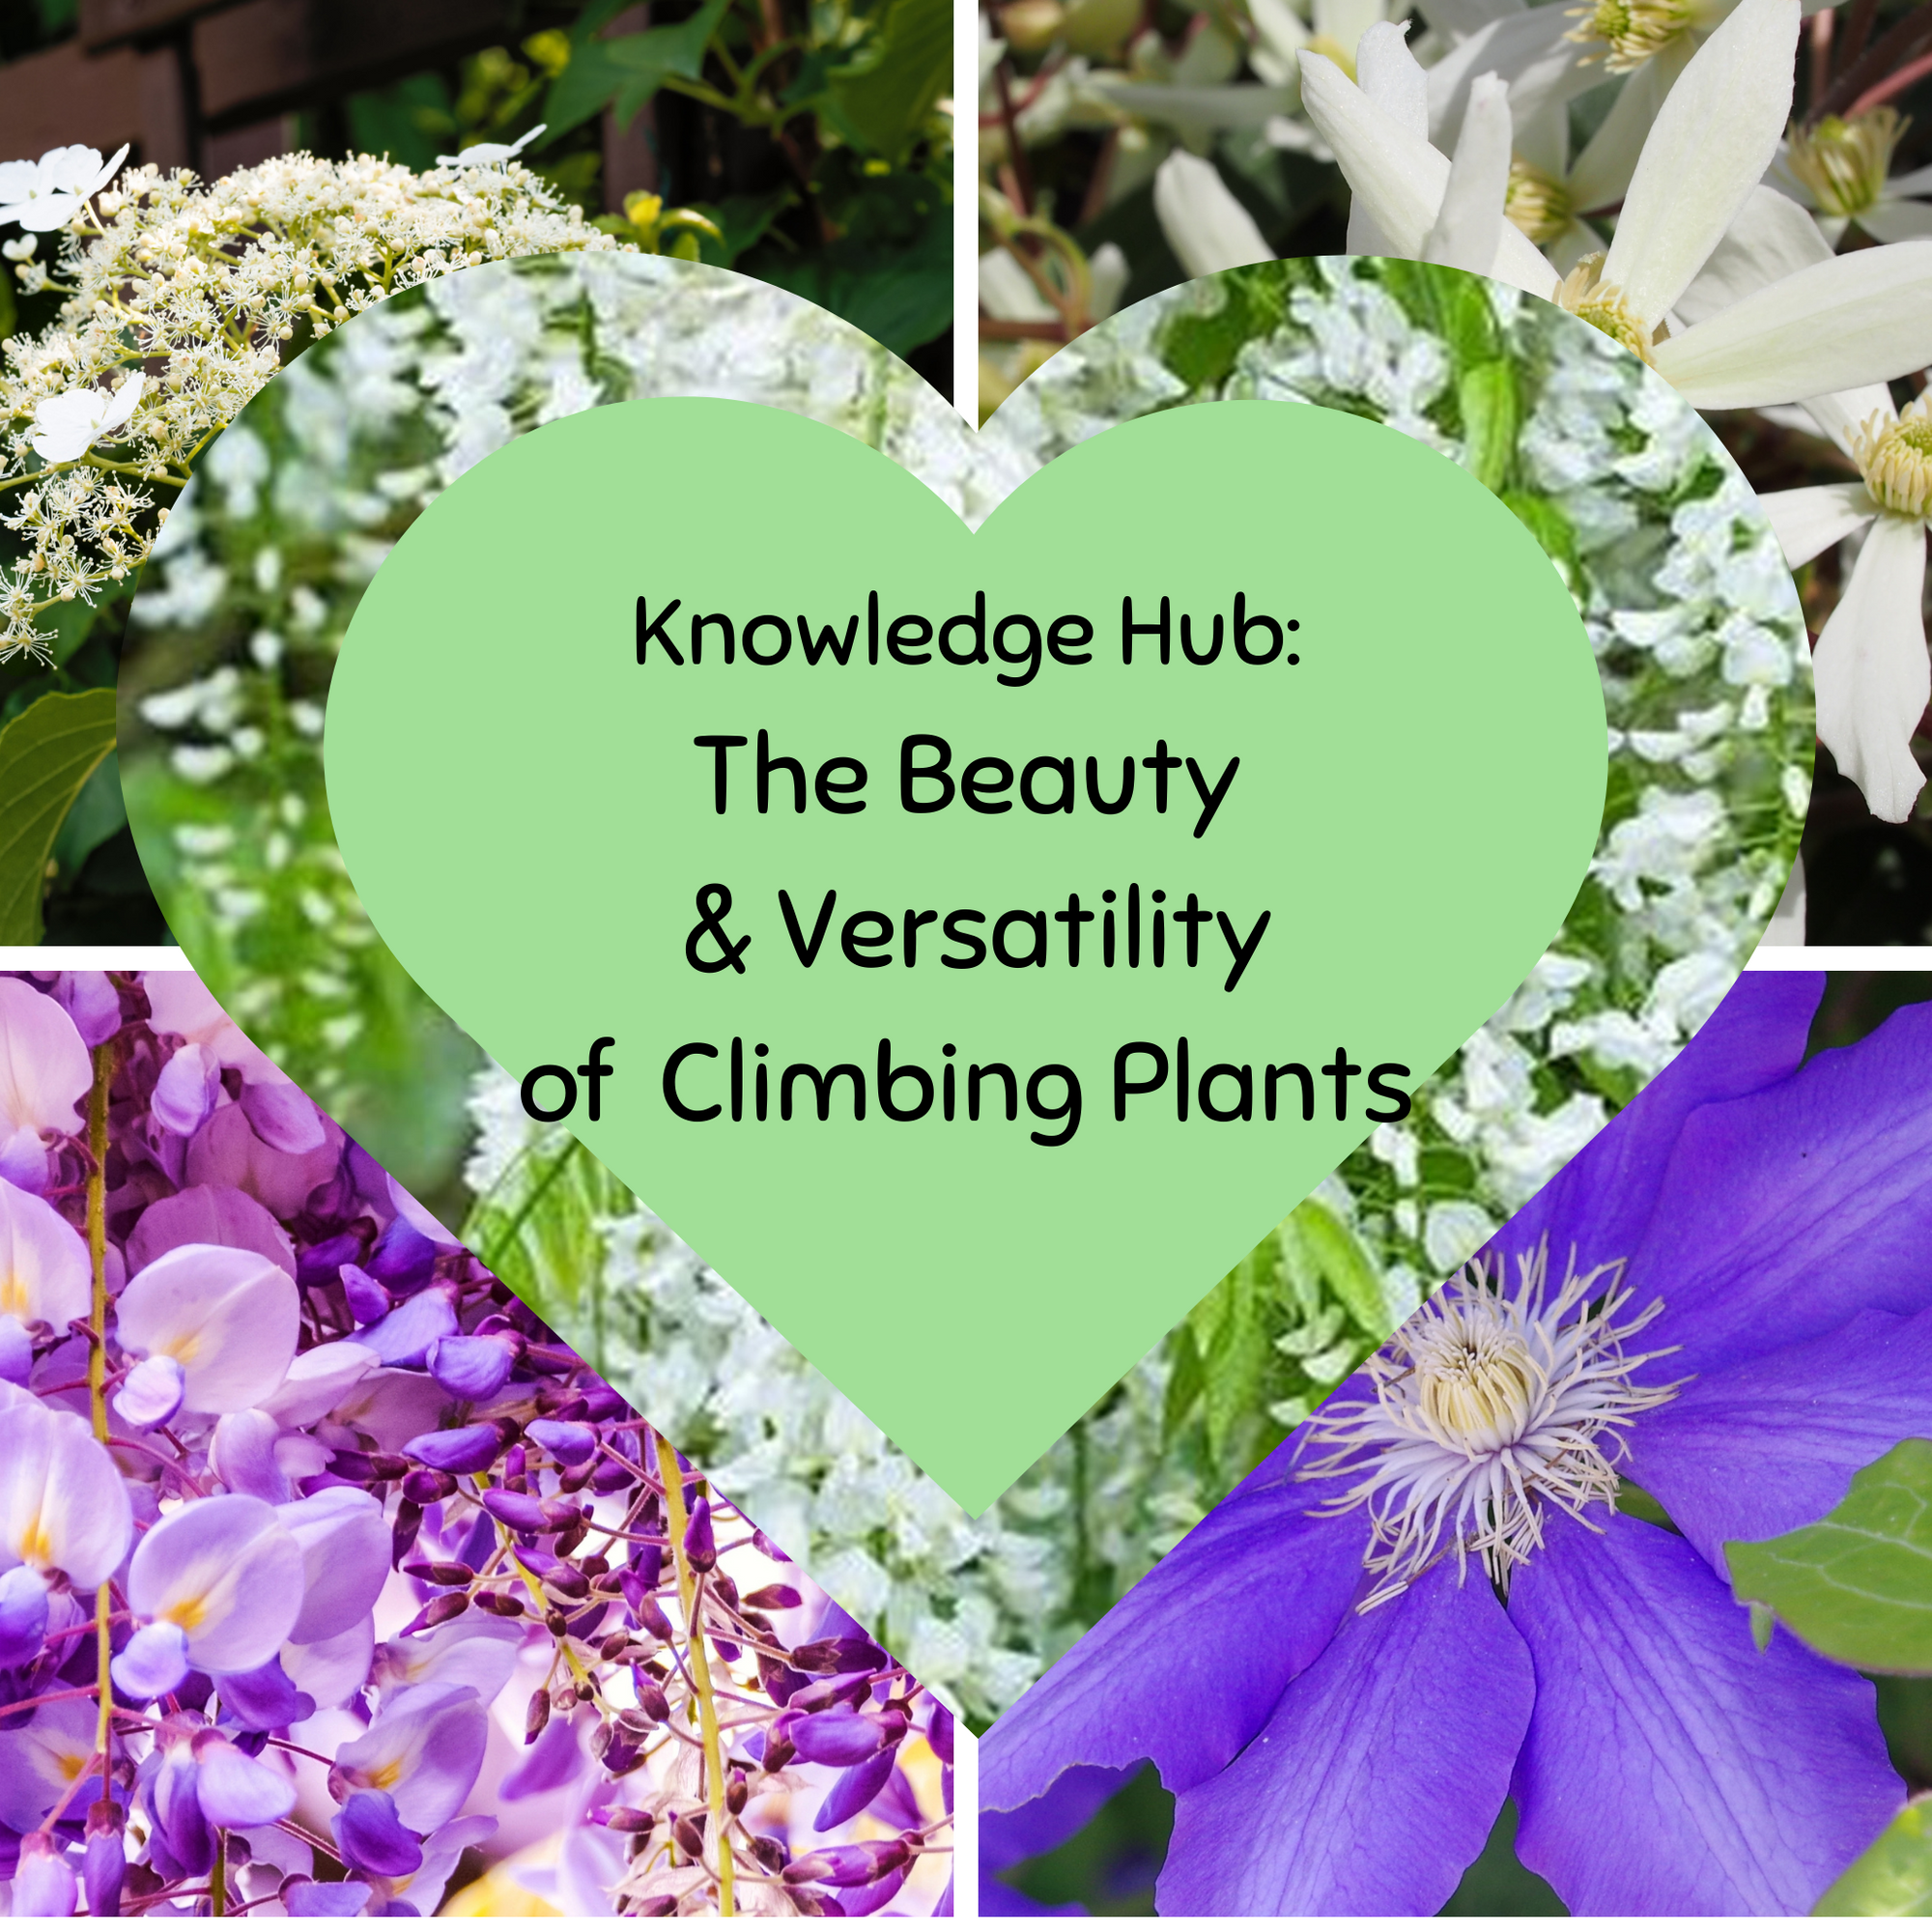 The Beauty and Versatility of Climbing Plants